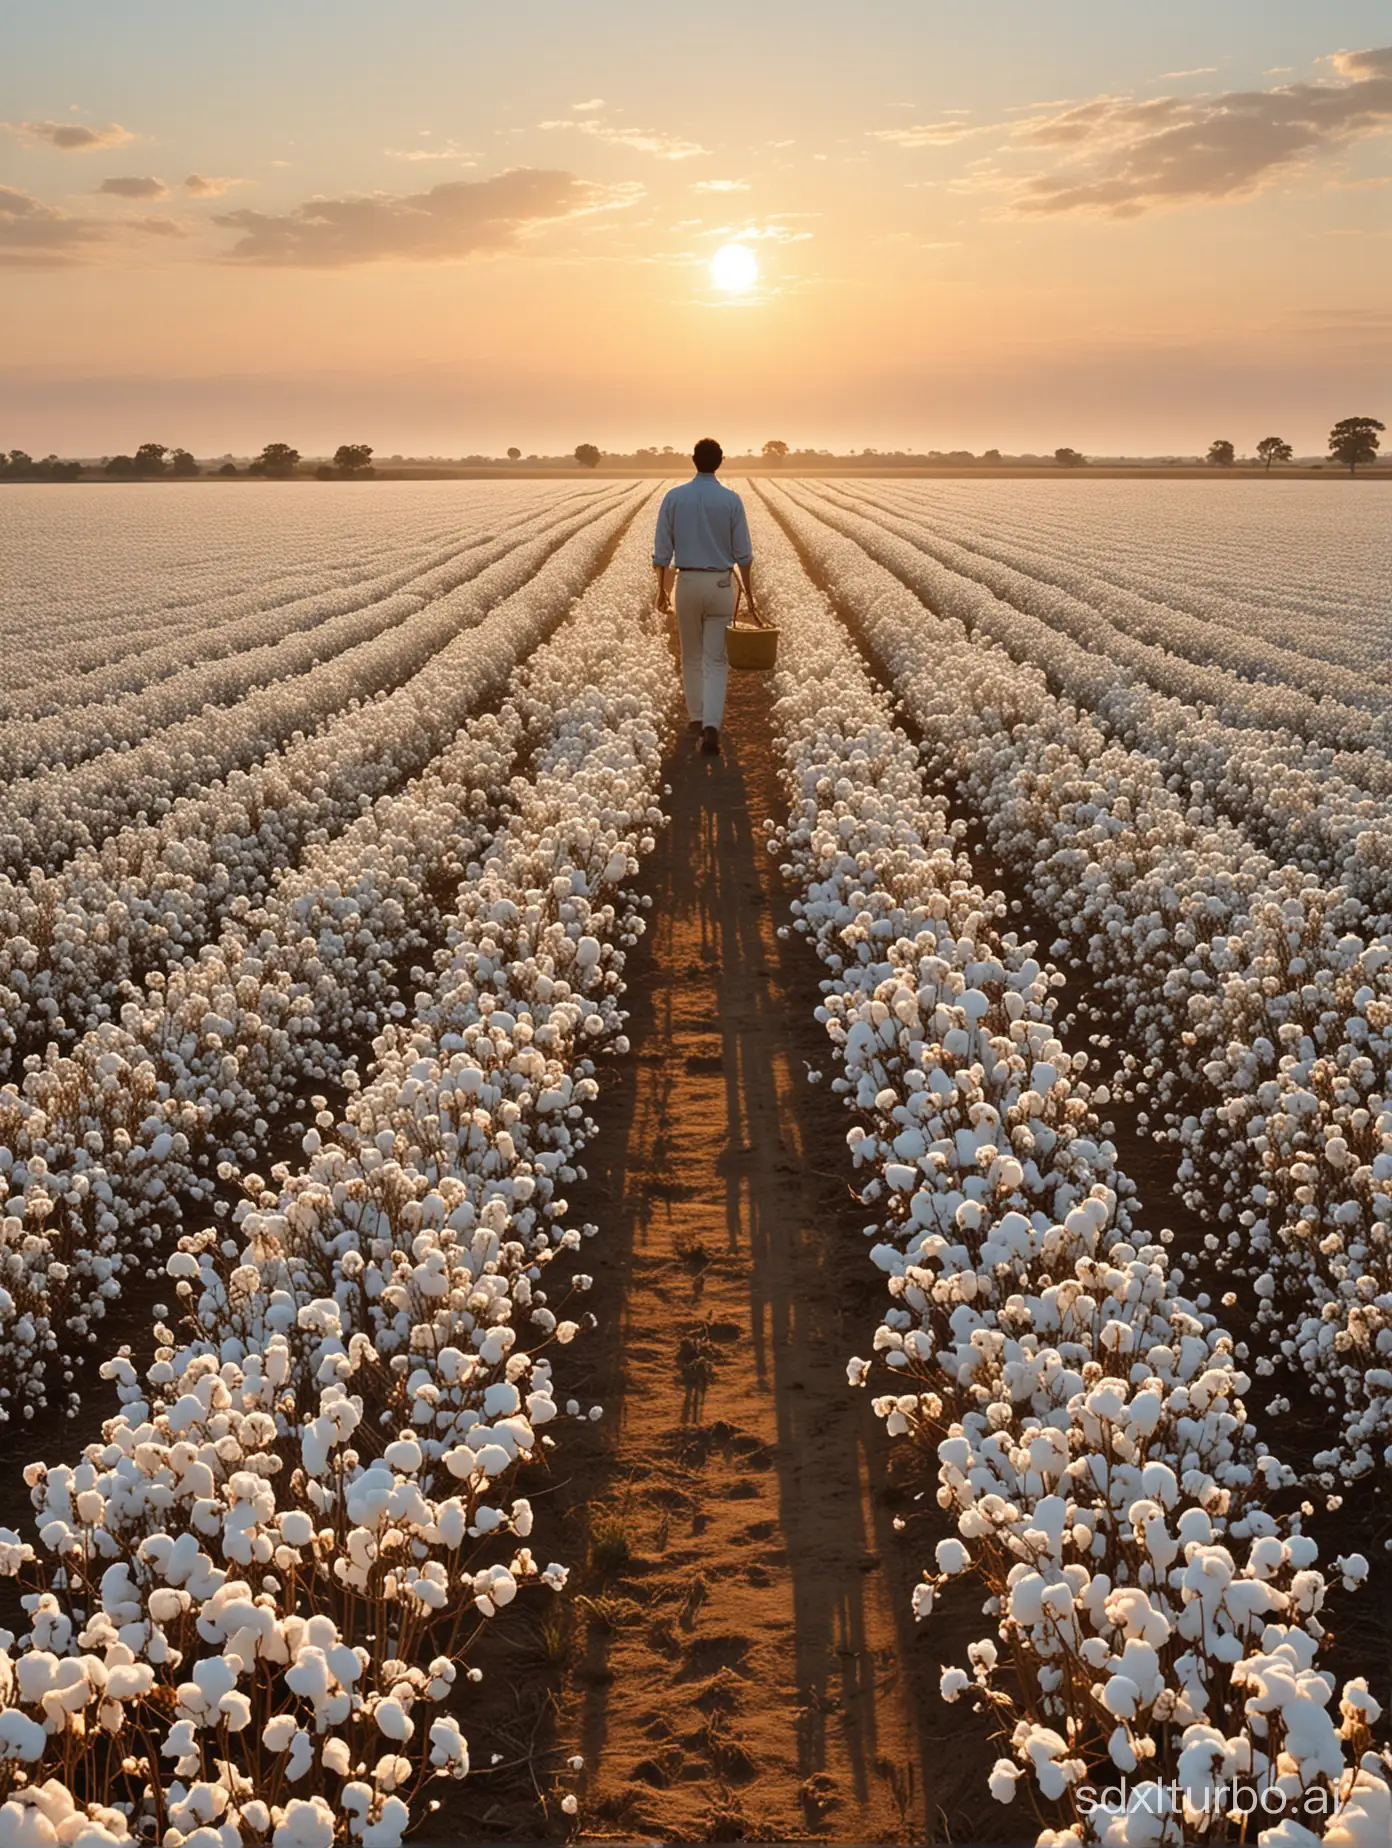 "Visualize a scene of cotton harvesting where a vast field stretches out, with endless rows of white plants disappearing into the horizon. The setting sun gently gilds the soft plumes, creating a visual spectacle of serene and tranquil beauty. Each cotton plant stands tall and proud, its fluffy white bolls swaying gently in the breeze. The distant horizon seems to beckon, inviting you to wander into the endless expanse of the field. As the golden light of sunset bathes the landscape, casting long shadows across the rows of cotton, a sense of peace washes over you, as if time itself has slowed down to savor the moment. It's a scene of simple yet profound beauty, reminiscent of the quiet majesty of rural landscapes captured by artists like Andrew Wyeth, who found inspiration in the simplicity of everyday life."